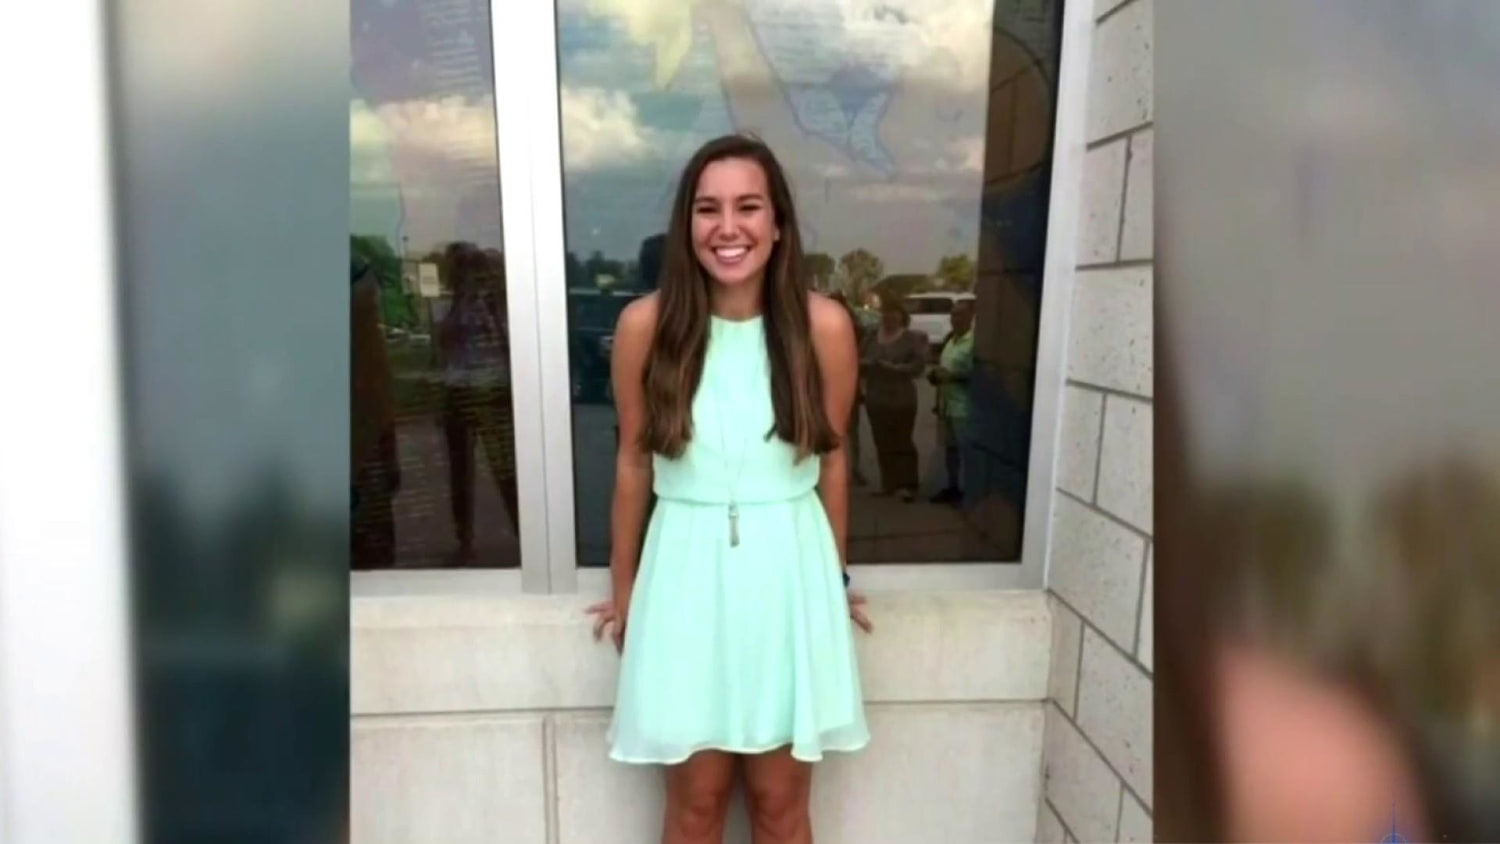 Desperate search for missing Iowa college student Mollie Tibbetts